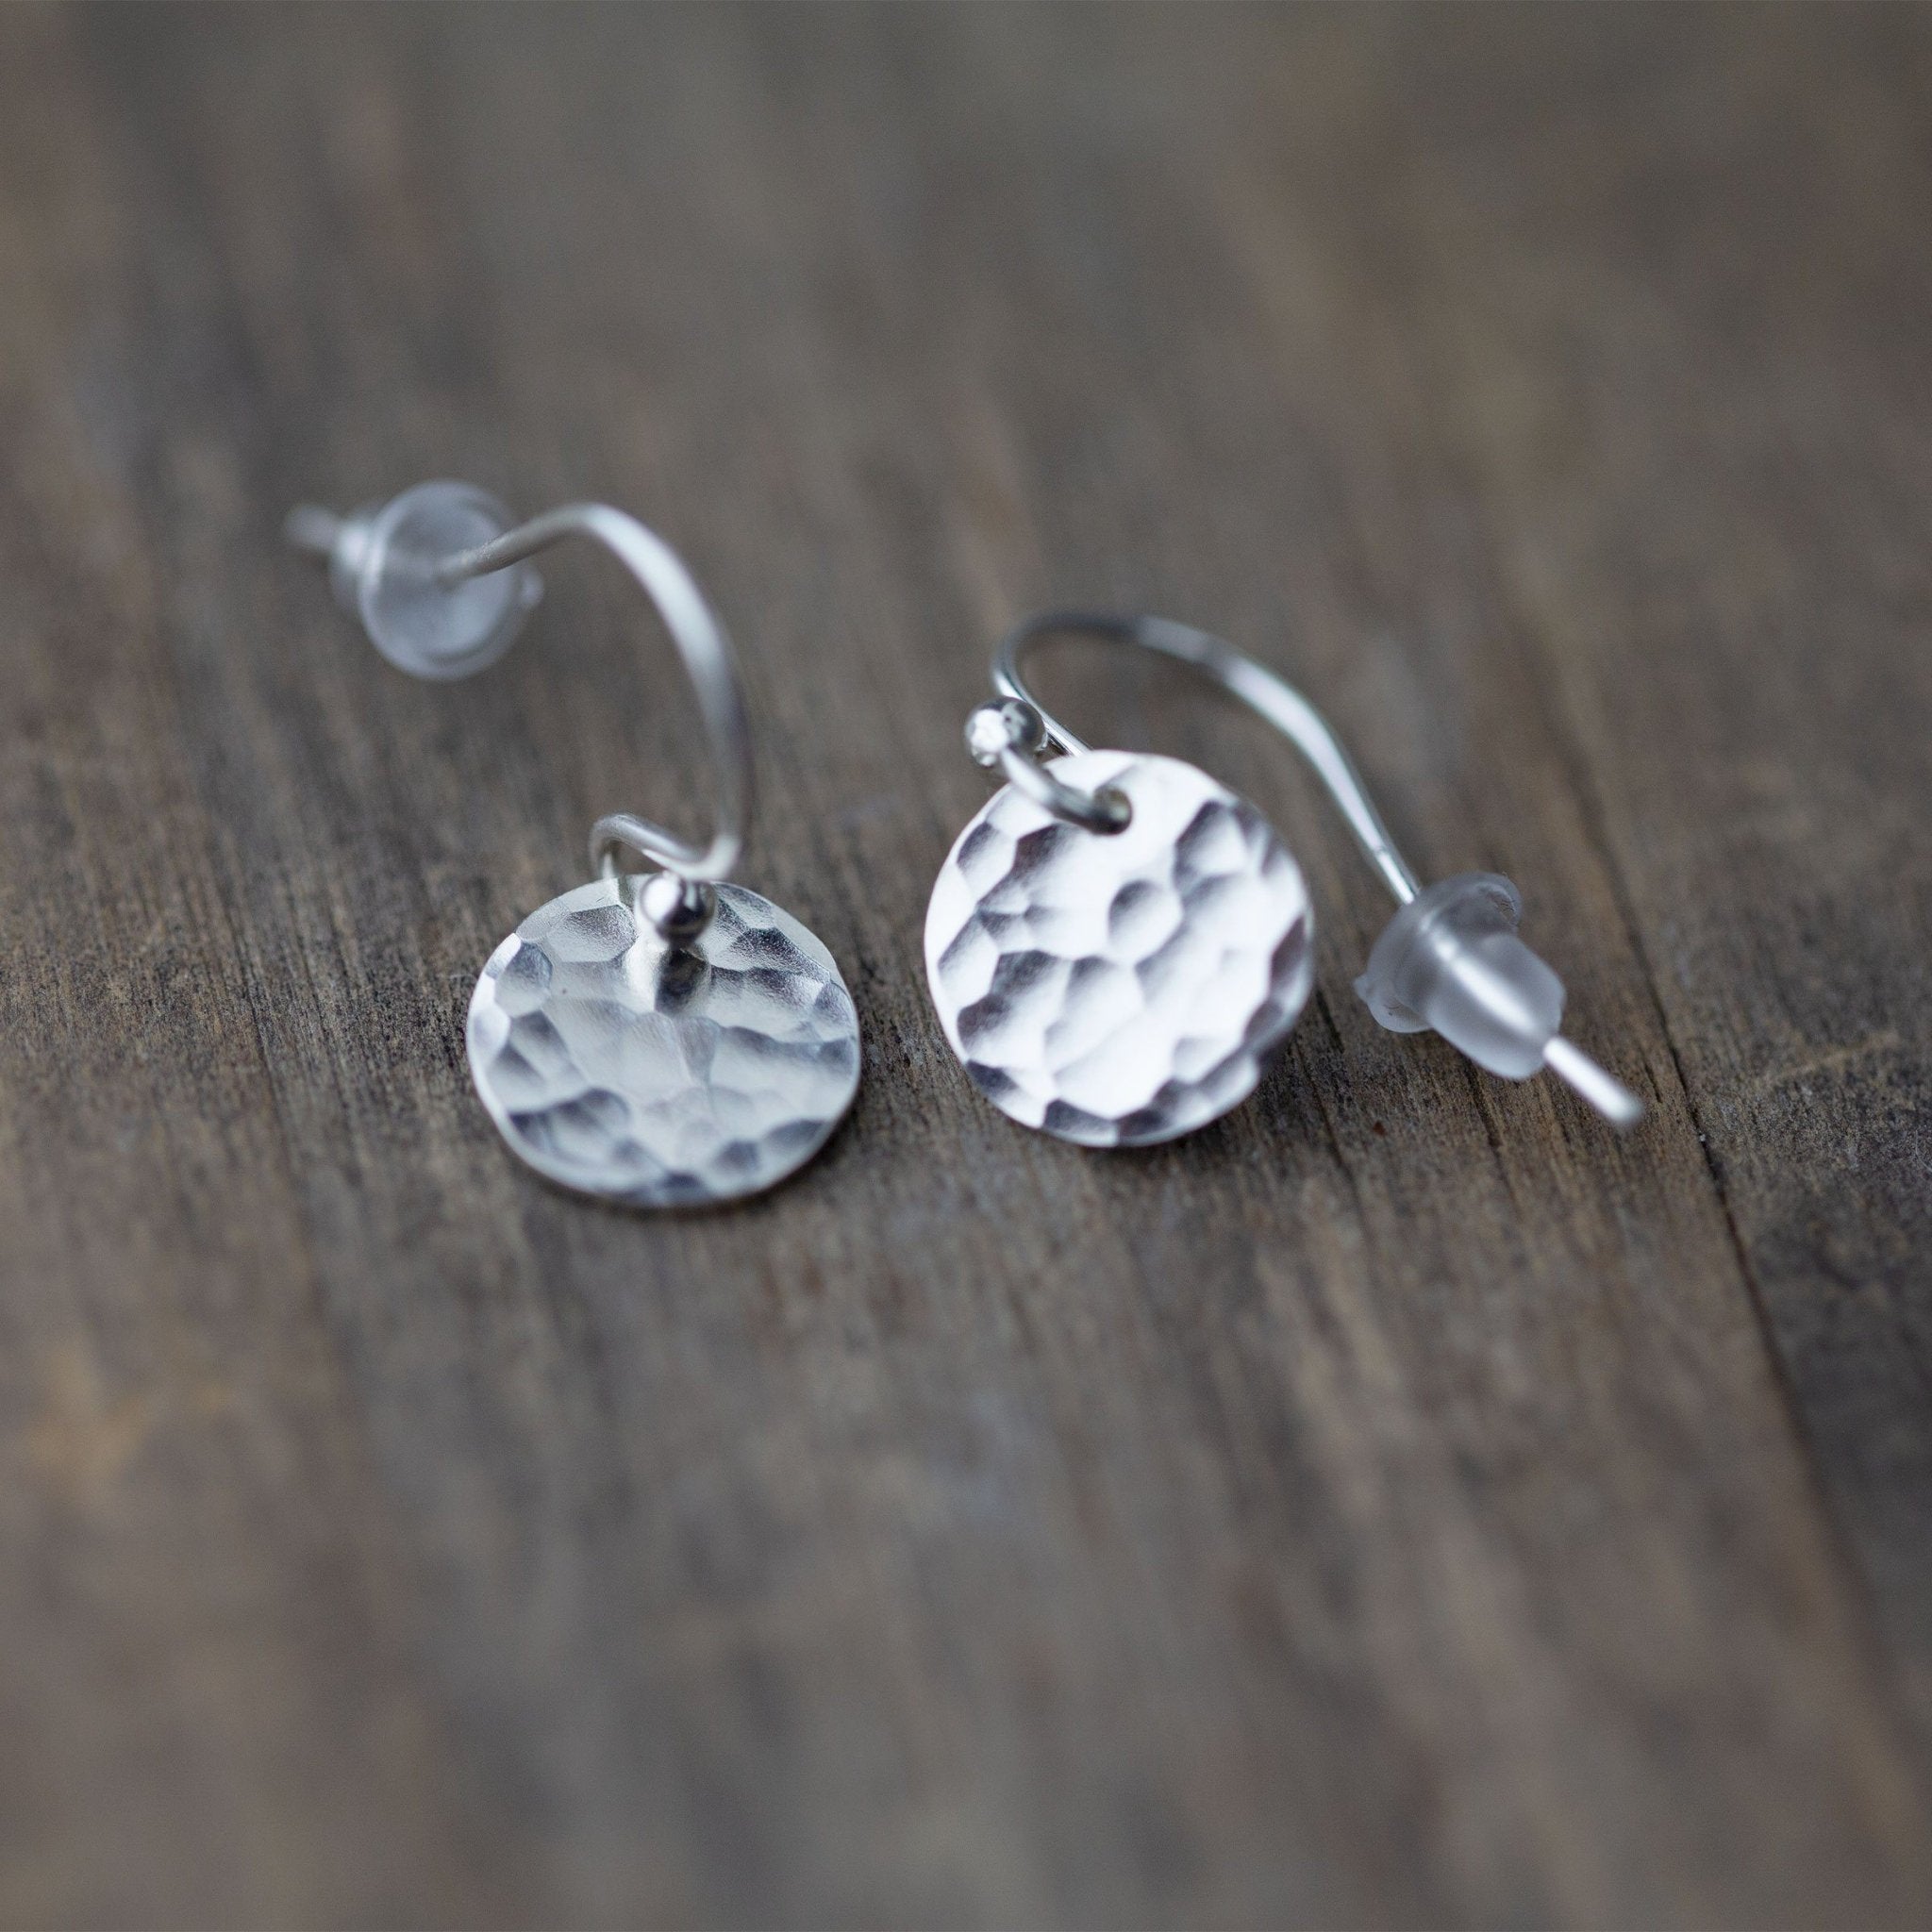 Tiny Silver Hammered Disc Earrings - Handmade Jewelry by Burnish